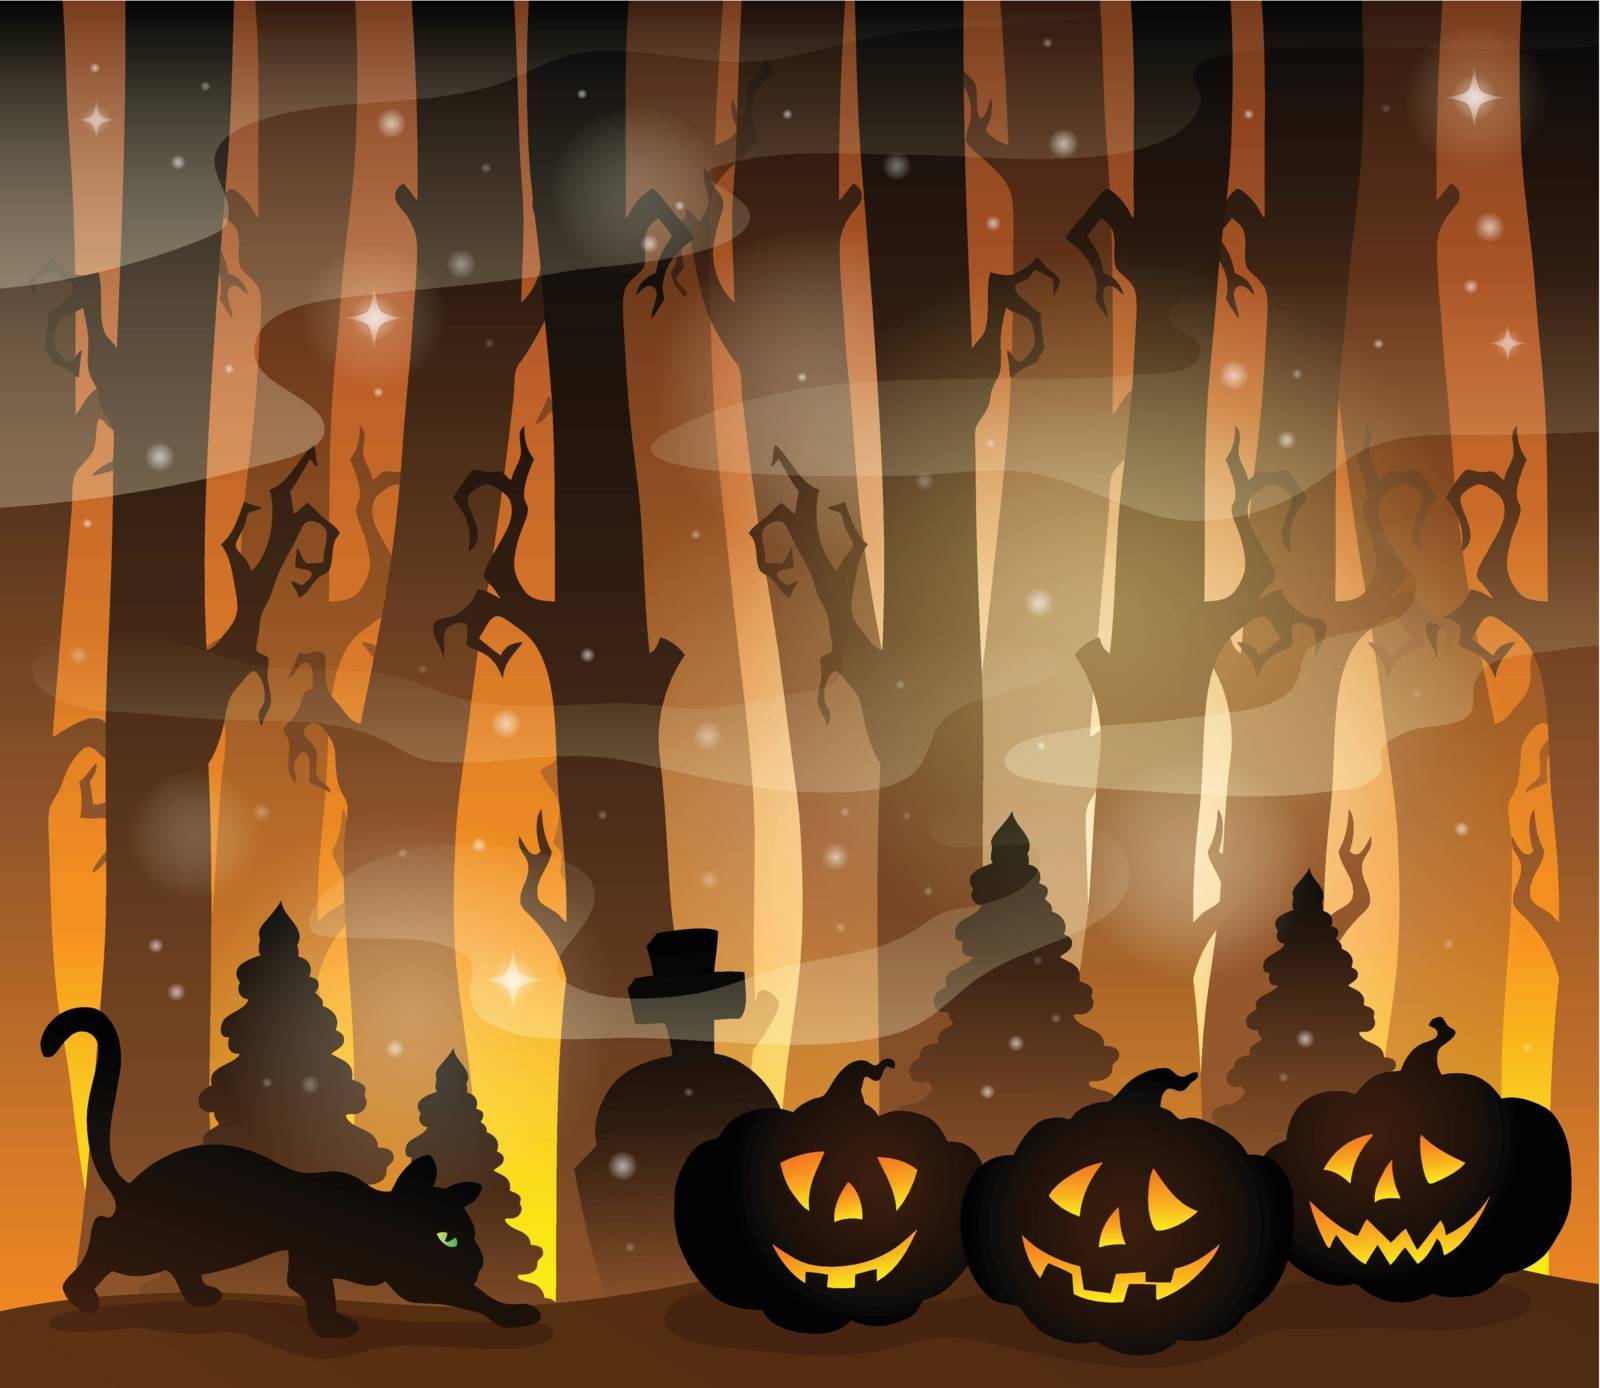 Mysterious forest theme image 4 - eps10 vector illustration.